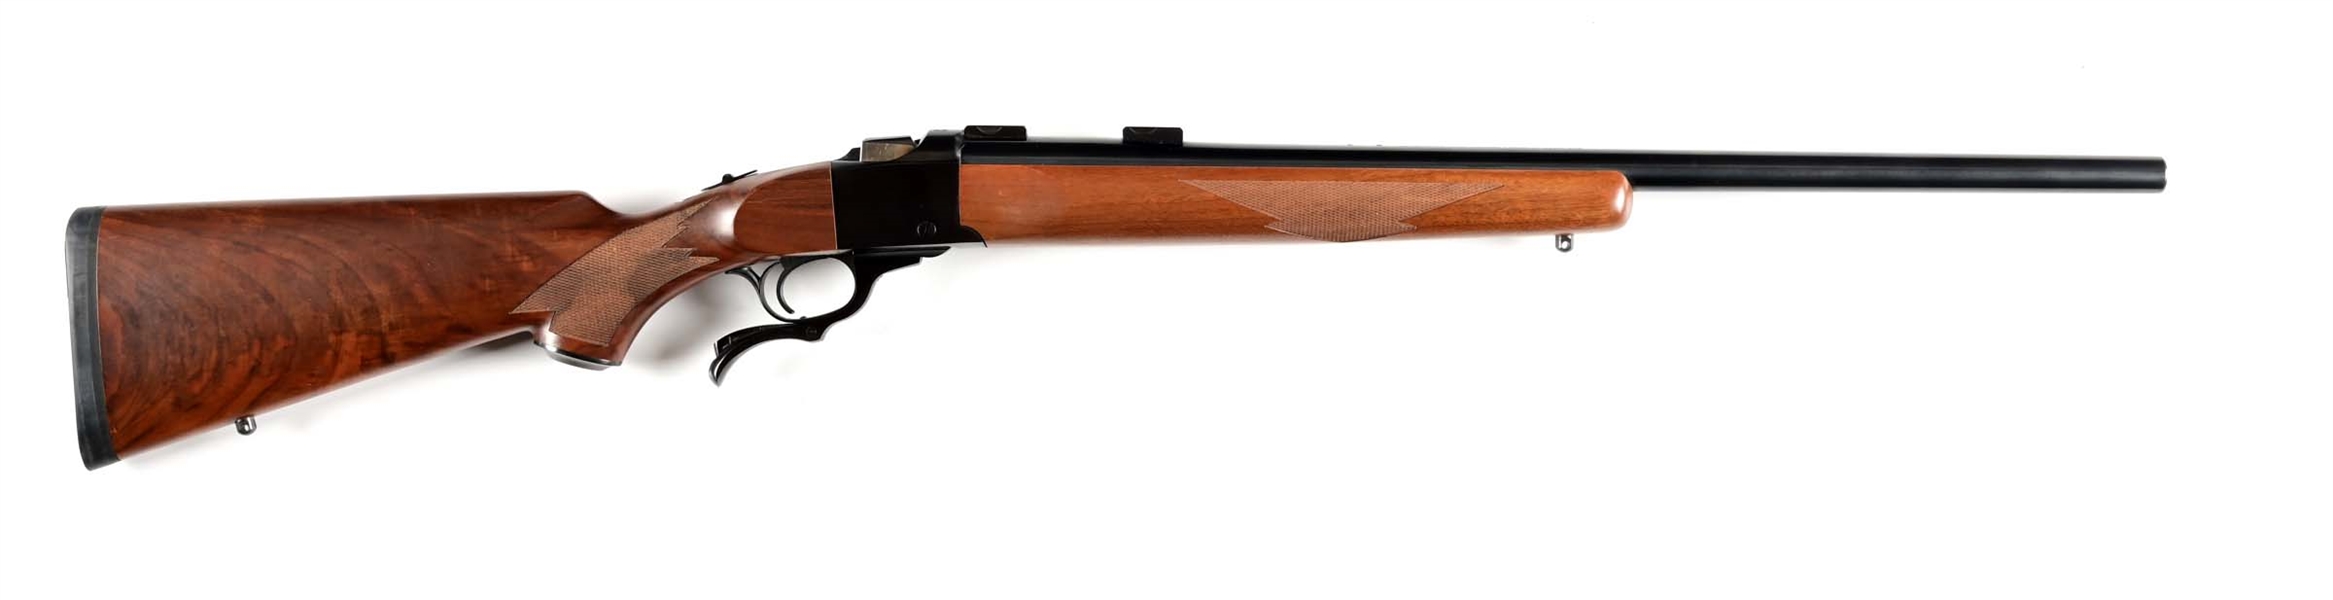 (M) RUGER NO. 1 SINGLE SHOT RIFLE IN .25-06.